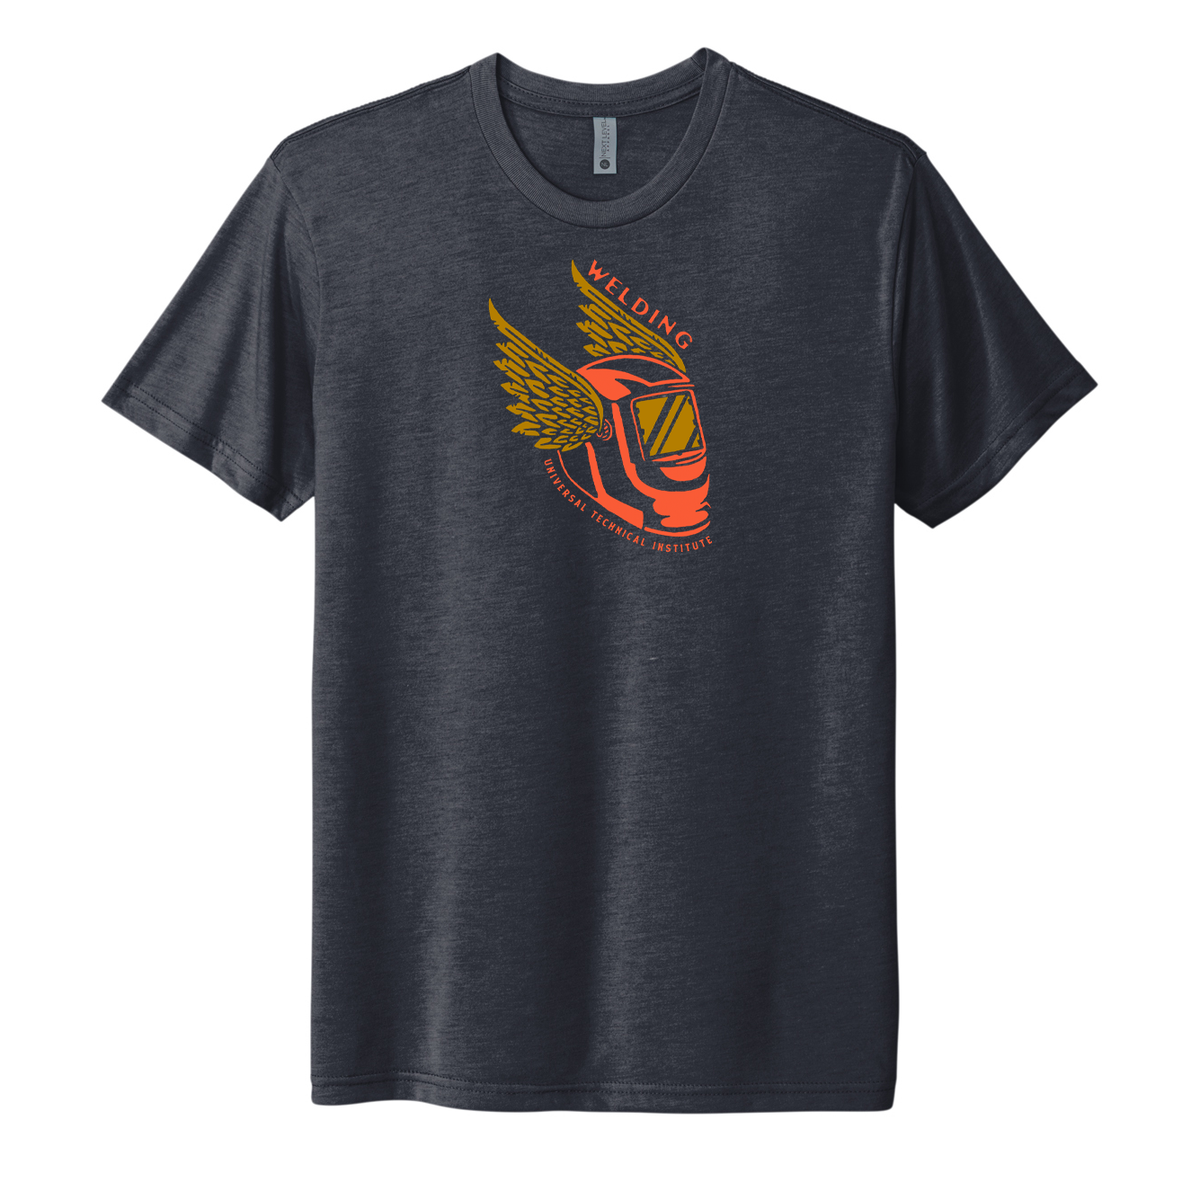 Welding Wings Graphic T-Shirt